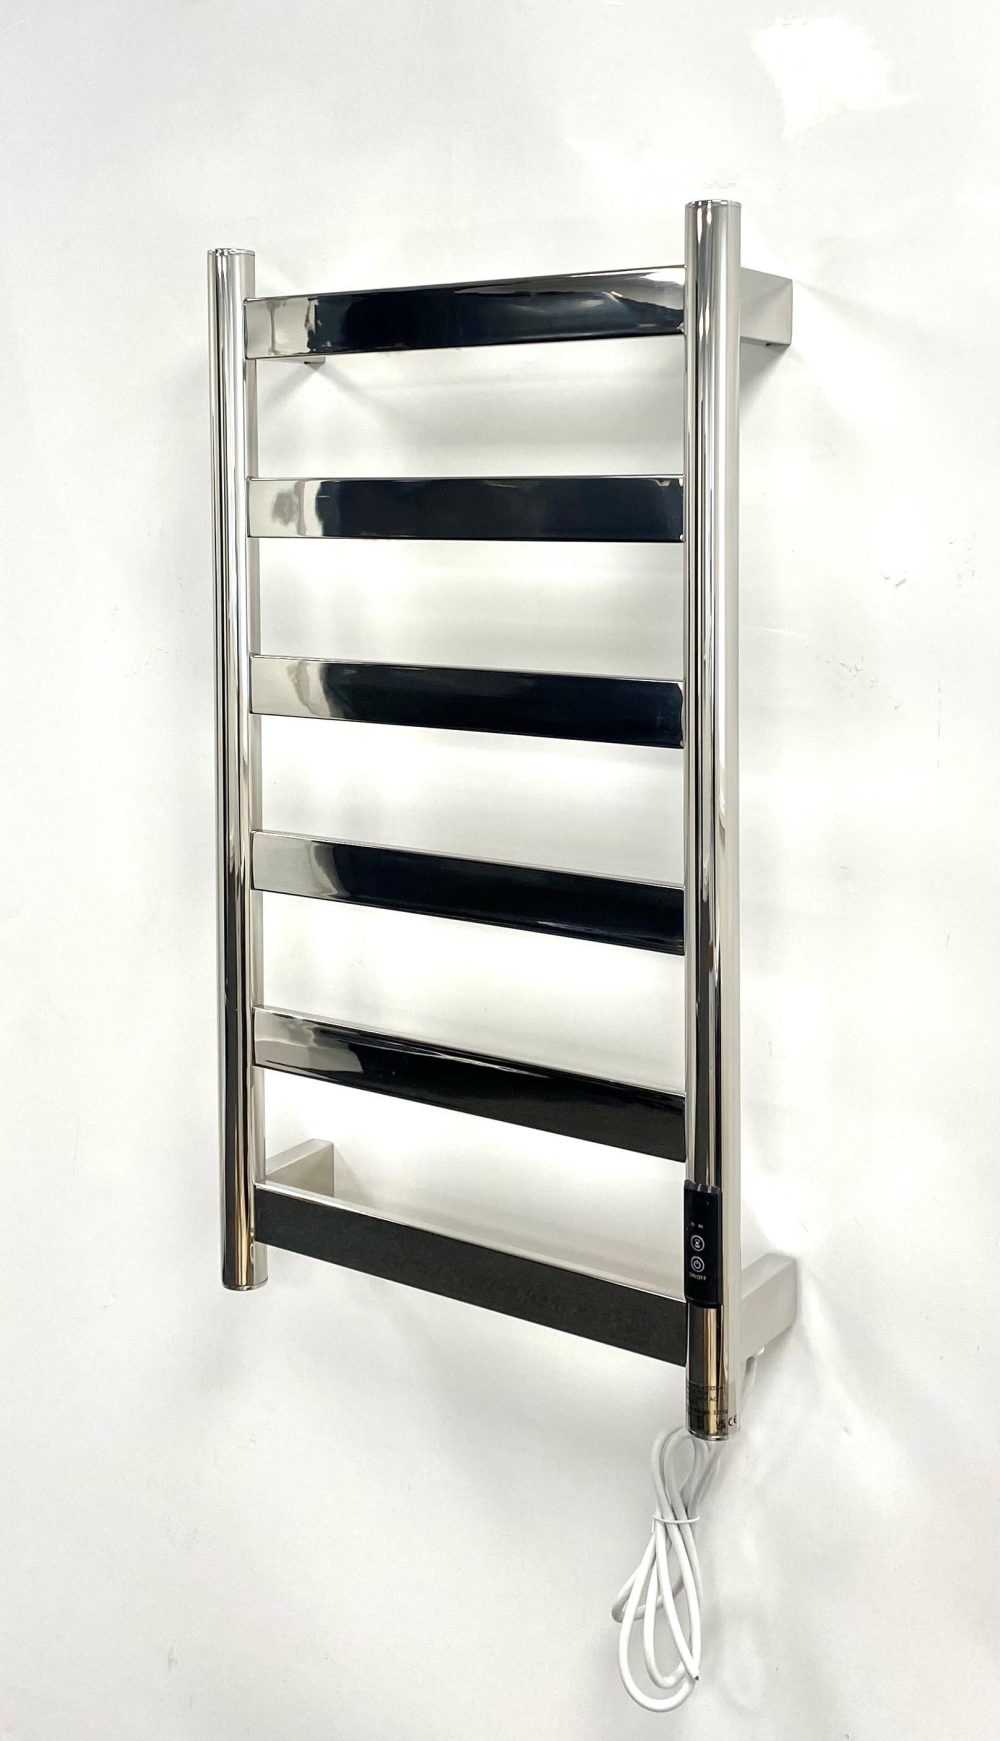 FALA Dry Electric Heated Stainless Steel Towel Rails 700mm High